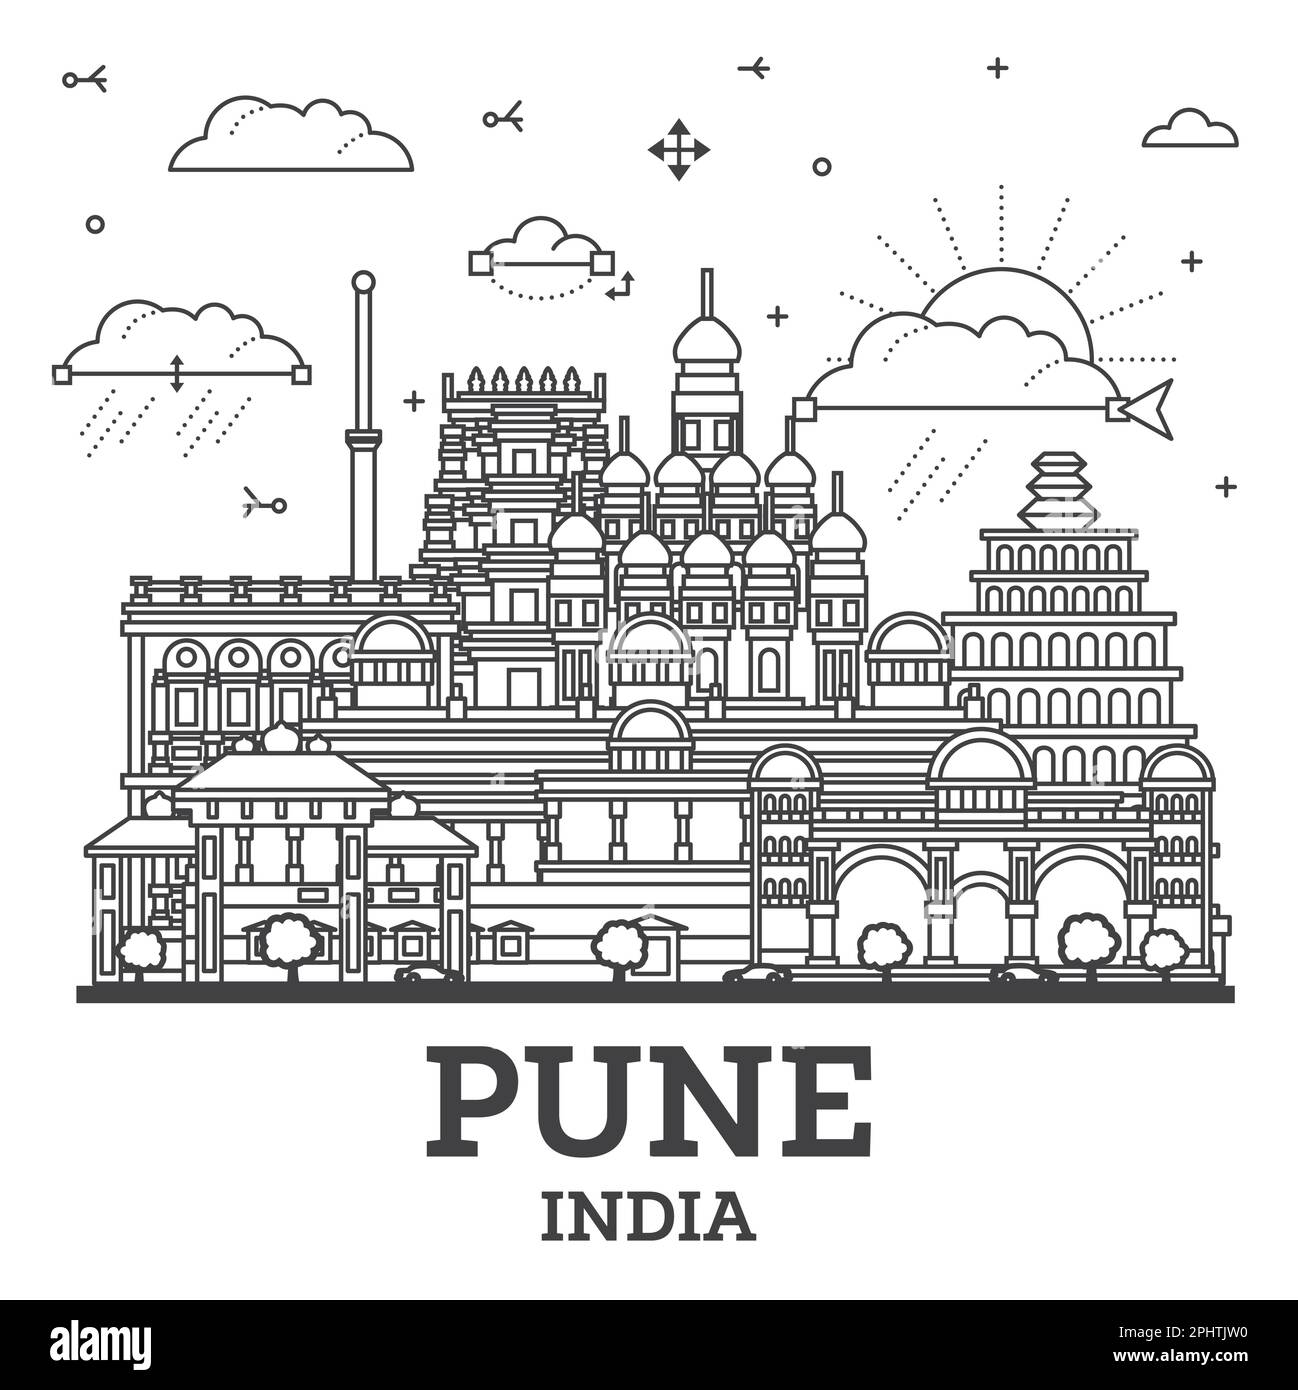 Outline Pune India City Skyline with Historic Buildings Isolated on White. Vector Illustration. Pune Maharashtra Cityscape with Landmarks. Stock Vector